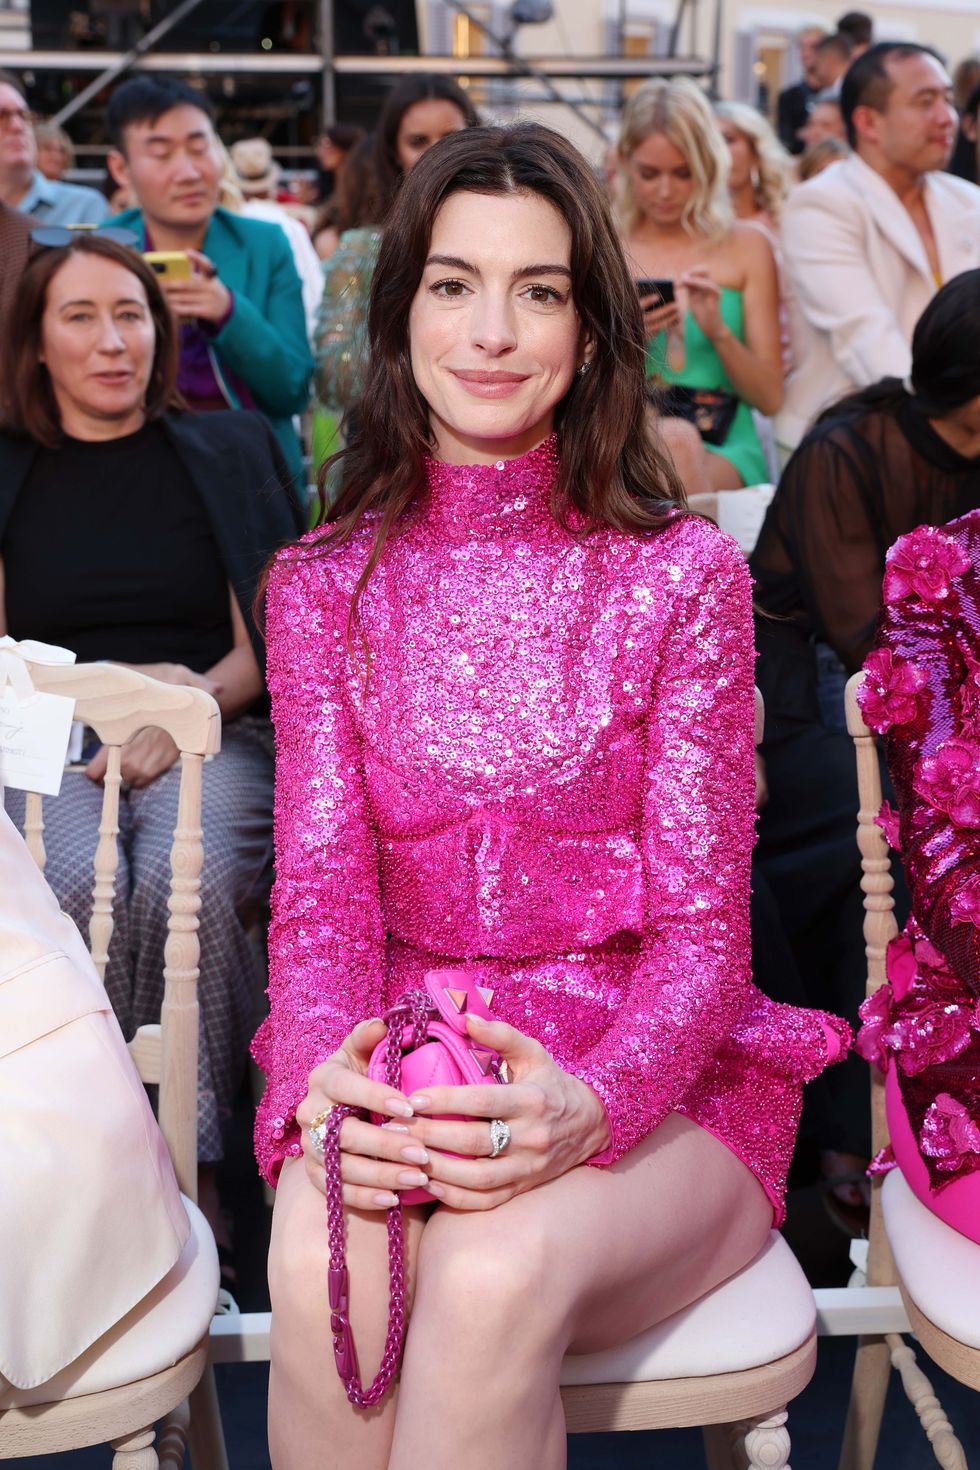 a person in a pink dress